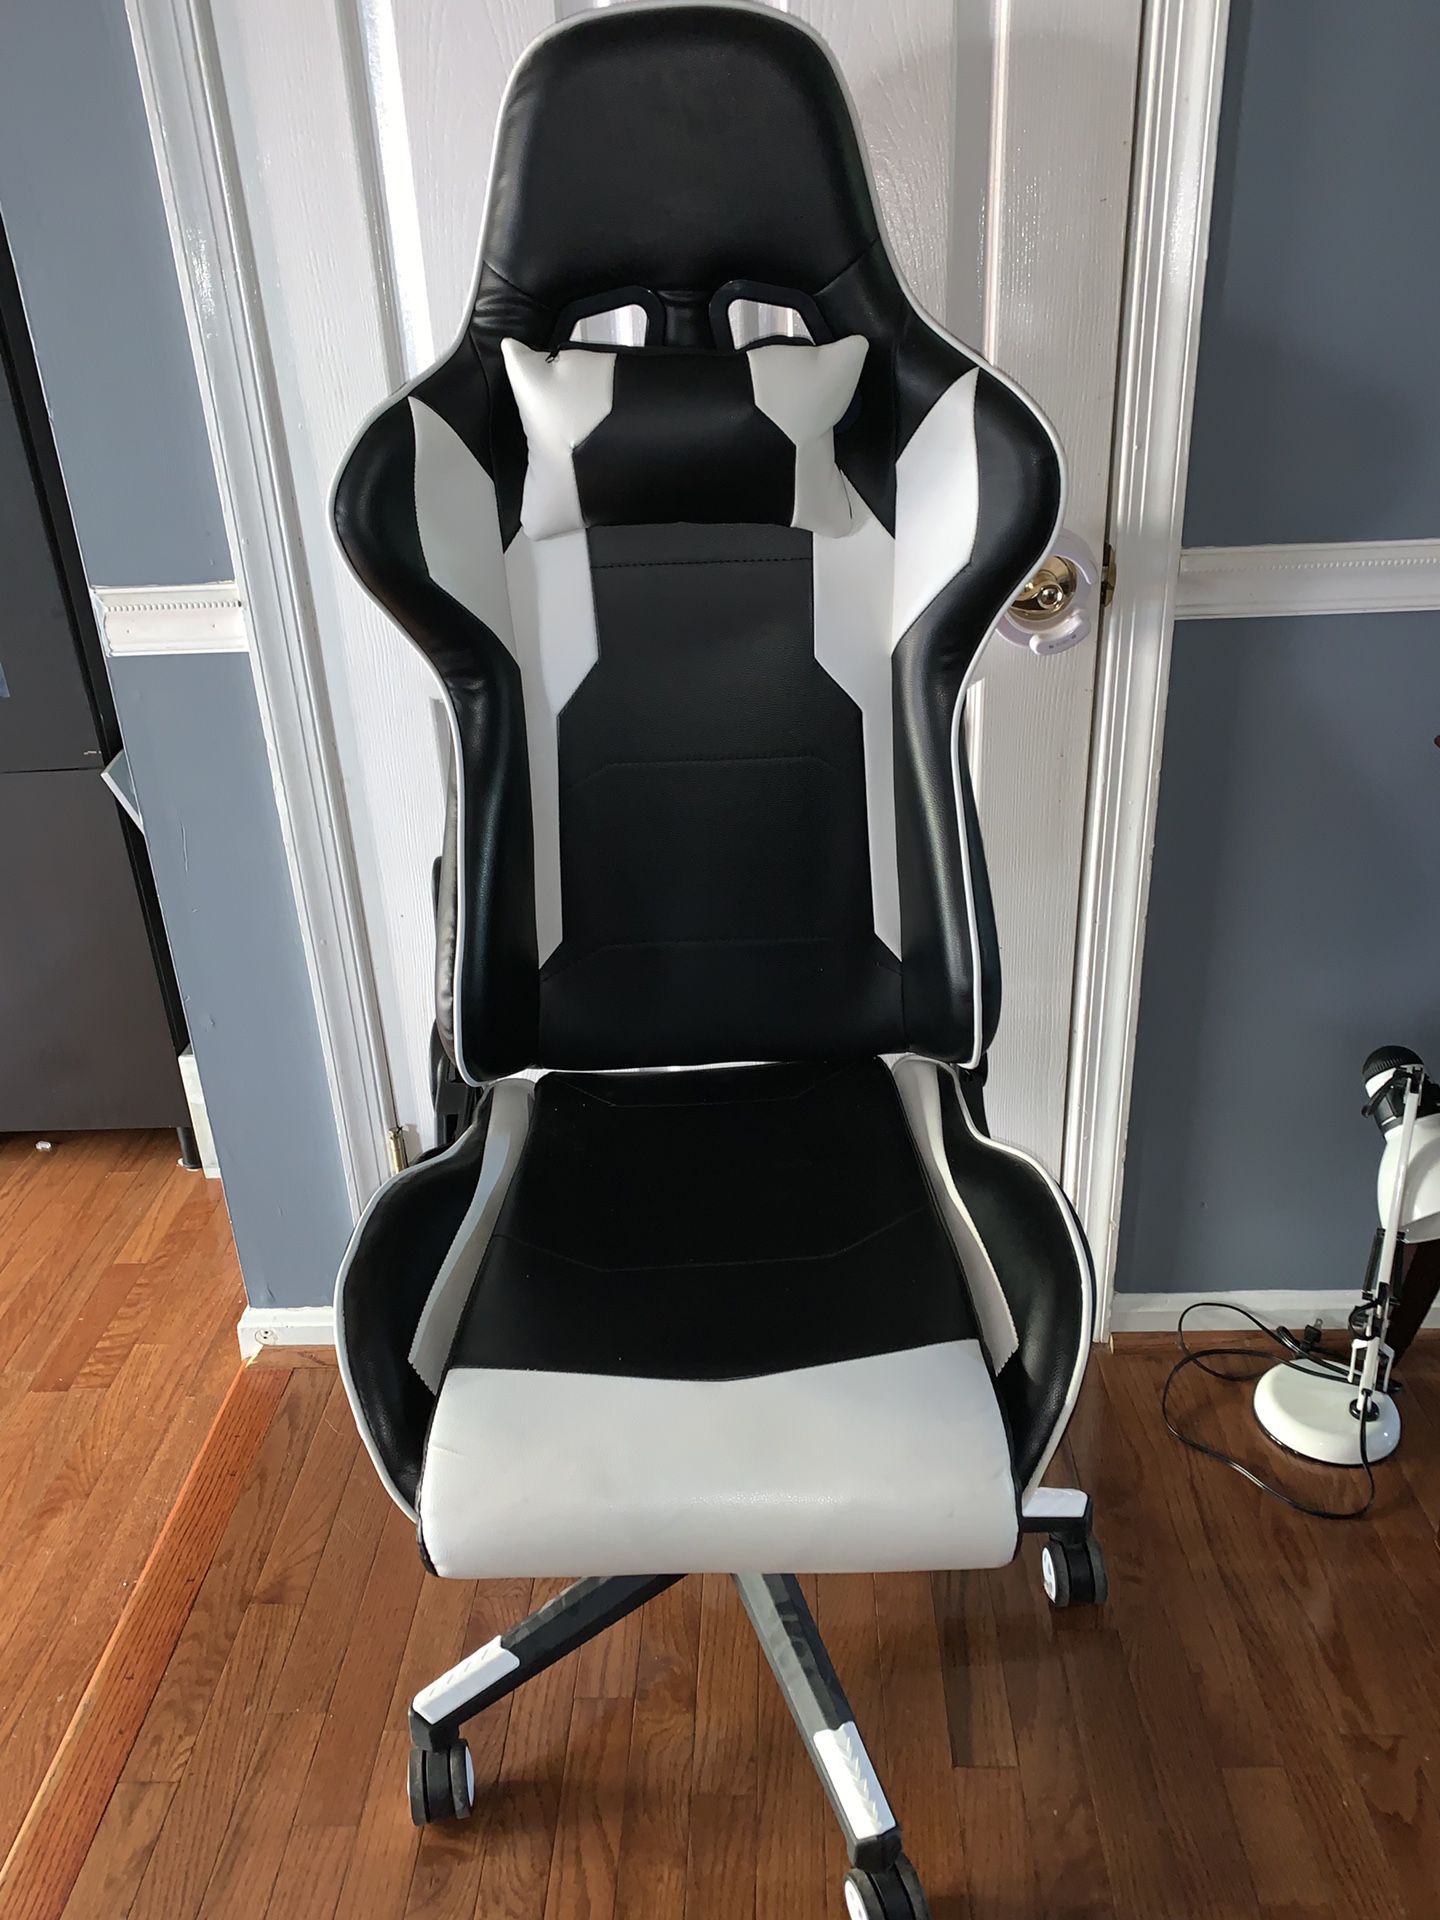 Gaming desk chair